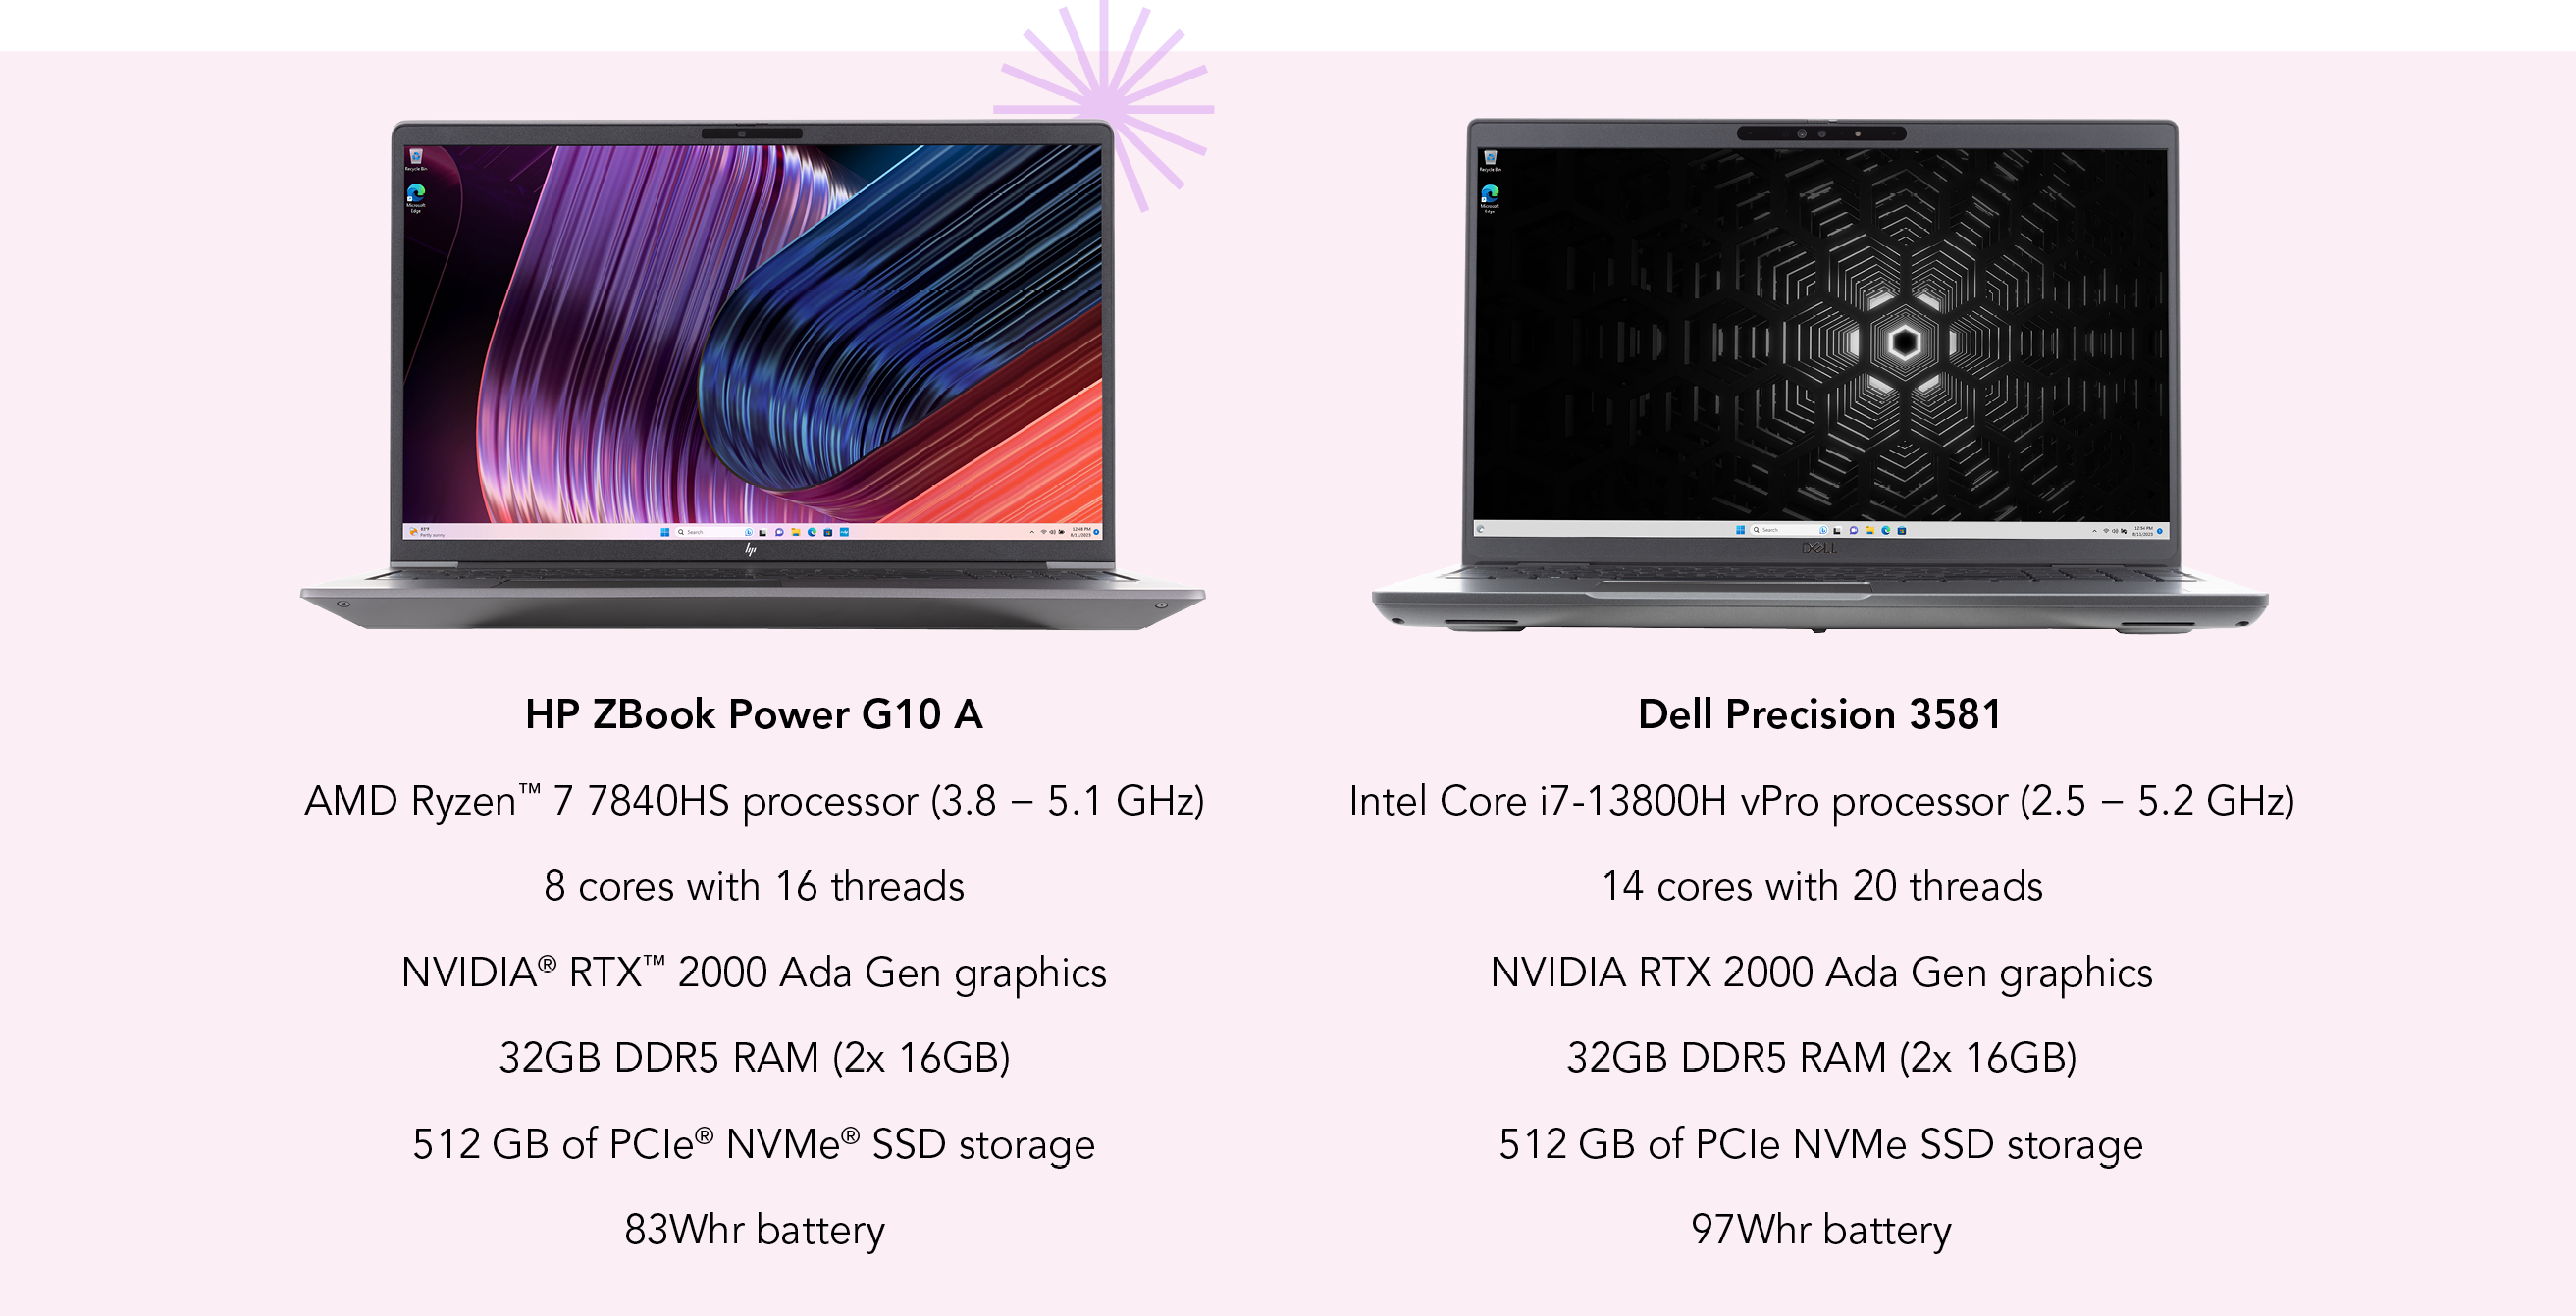 The HP ZBook Power G10 A features an AMD Ryzen 7 7840HS processor (2.8 – 5.1 GHz), 8 cores with 16 threads, NVIDIA RTX 2000 Ada Gen graphics, 32GB DDR5 RAM (2x 16GB), 512 GB of PCIe NVMe SSD storage, and an 83Whr battery. The Dell Precision 3581 features an Intel Core i7-13800H vPro processor (2.5 – 5.2 GHz), 14 cores with 20 threads, NVIDIA RTX 2000 Ada Gen graphics, 32GB DDR5 RAM (2x 16GB), 512 GB of PCIe NVMe SSD storage, and a 97Whr battery.